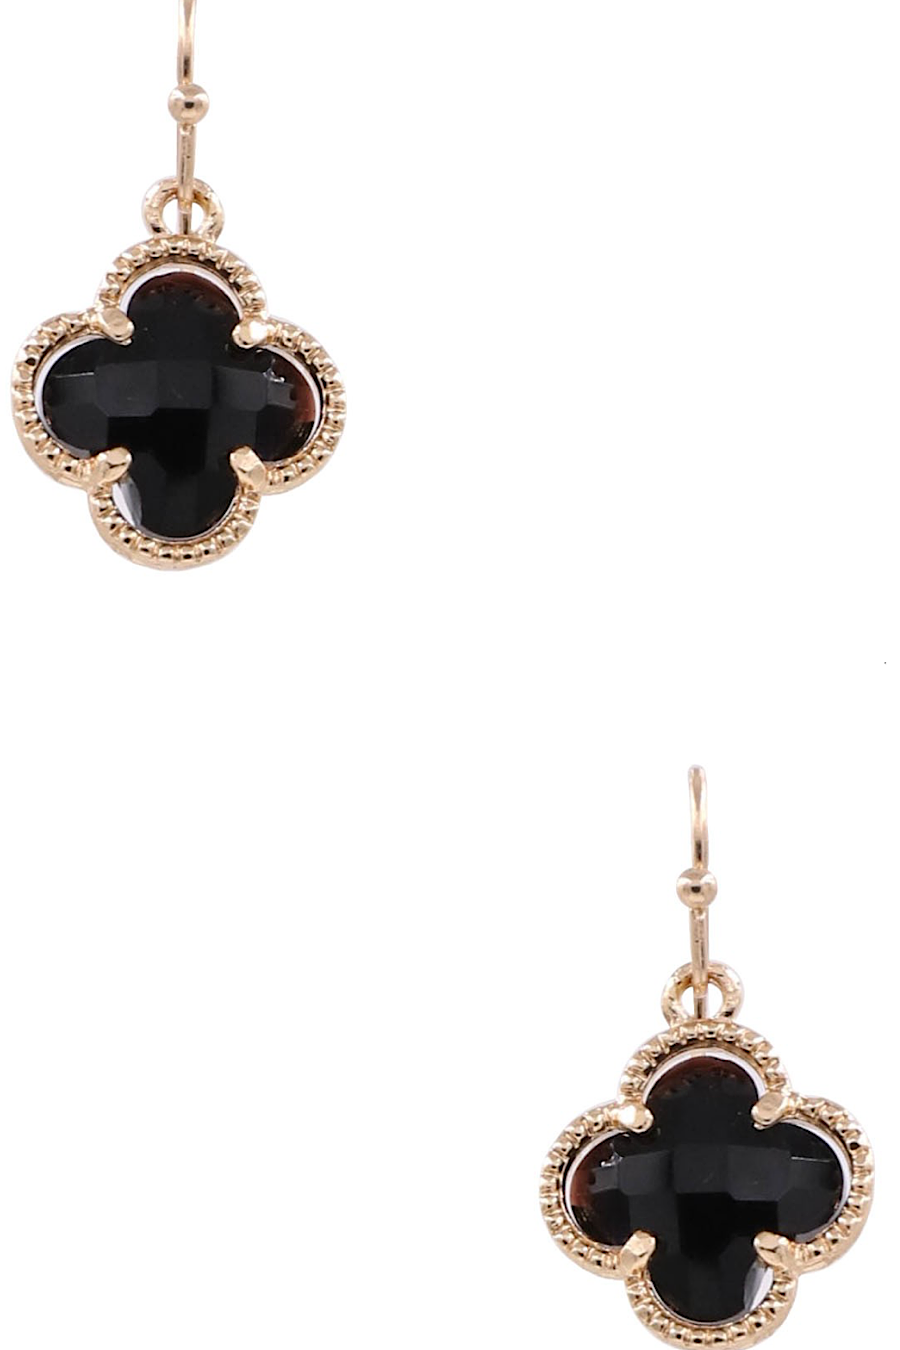 Glass Clover Earrings in Black or Crystal Clear